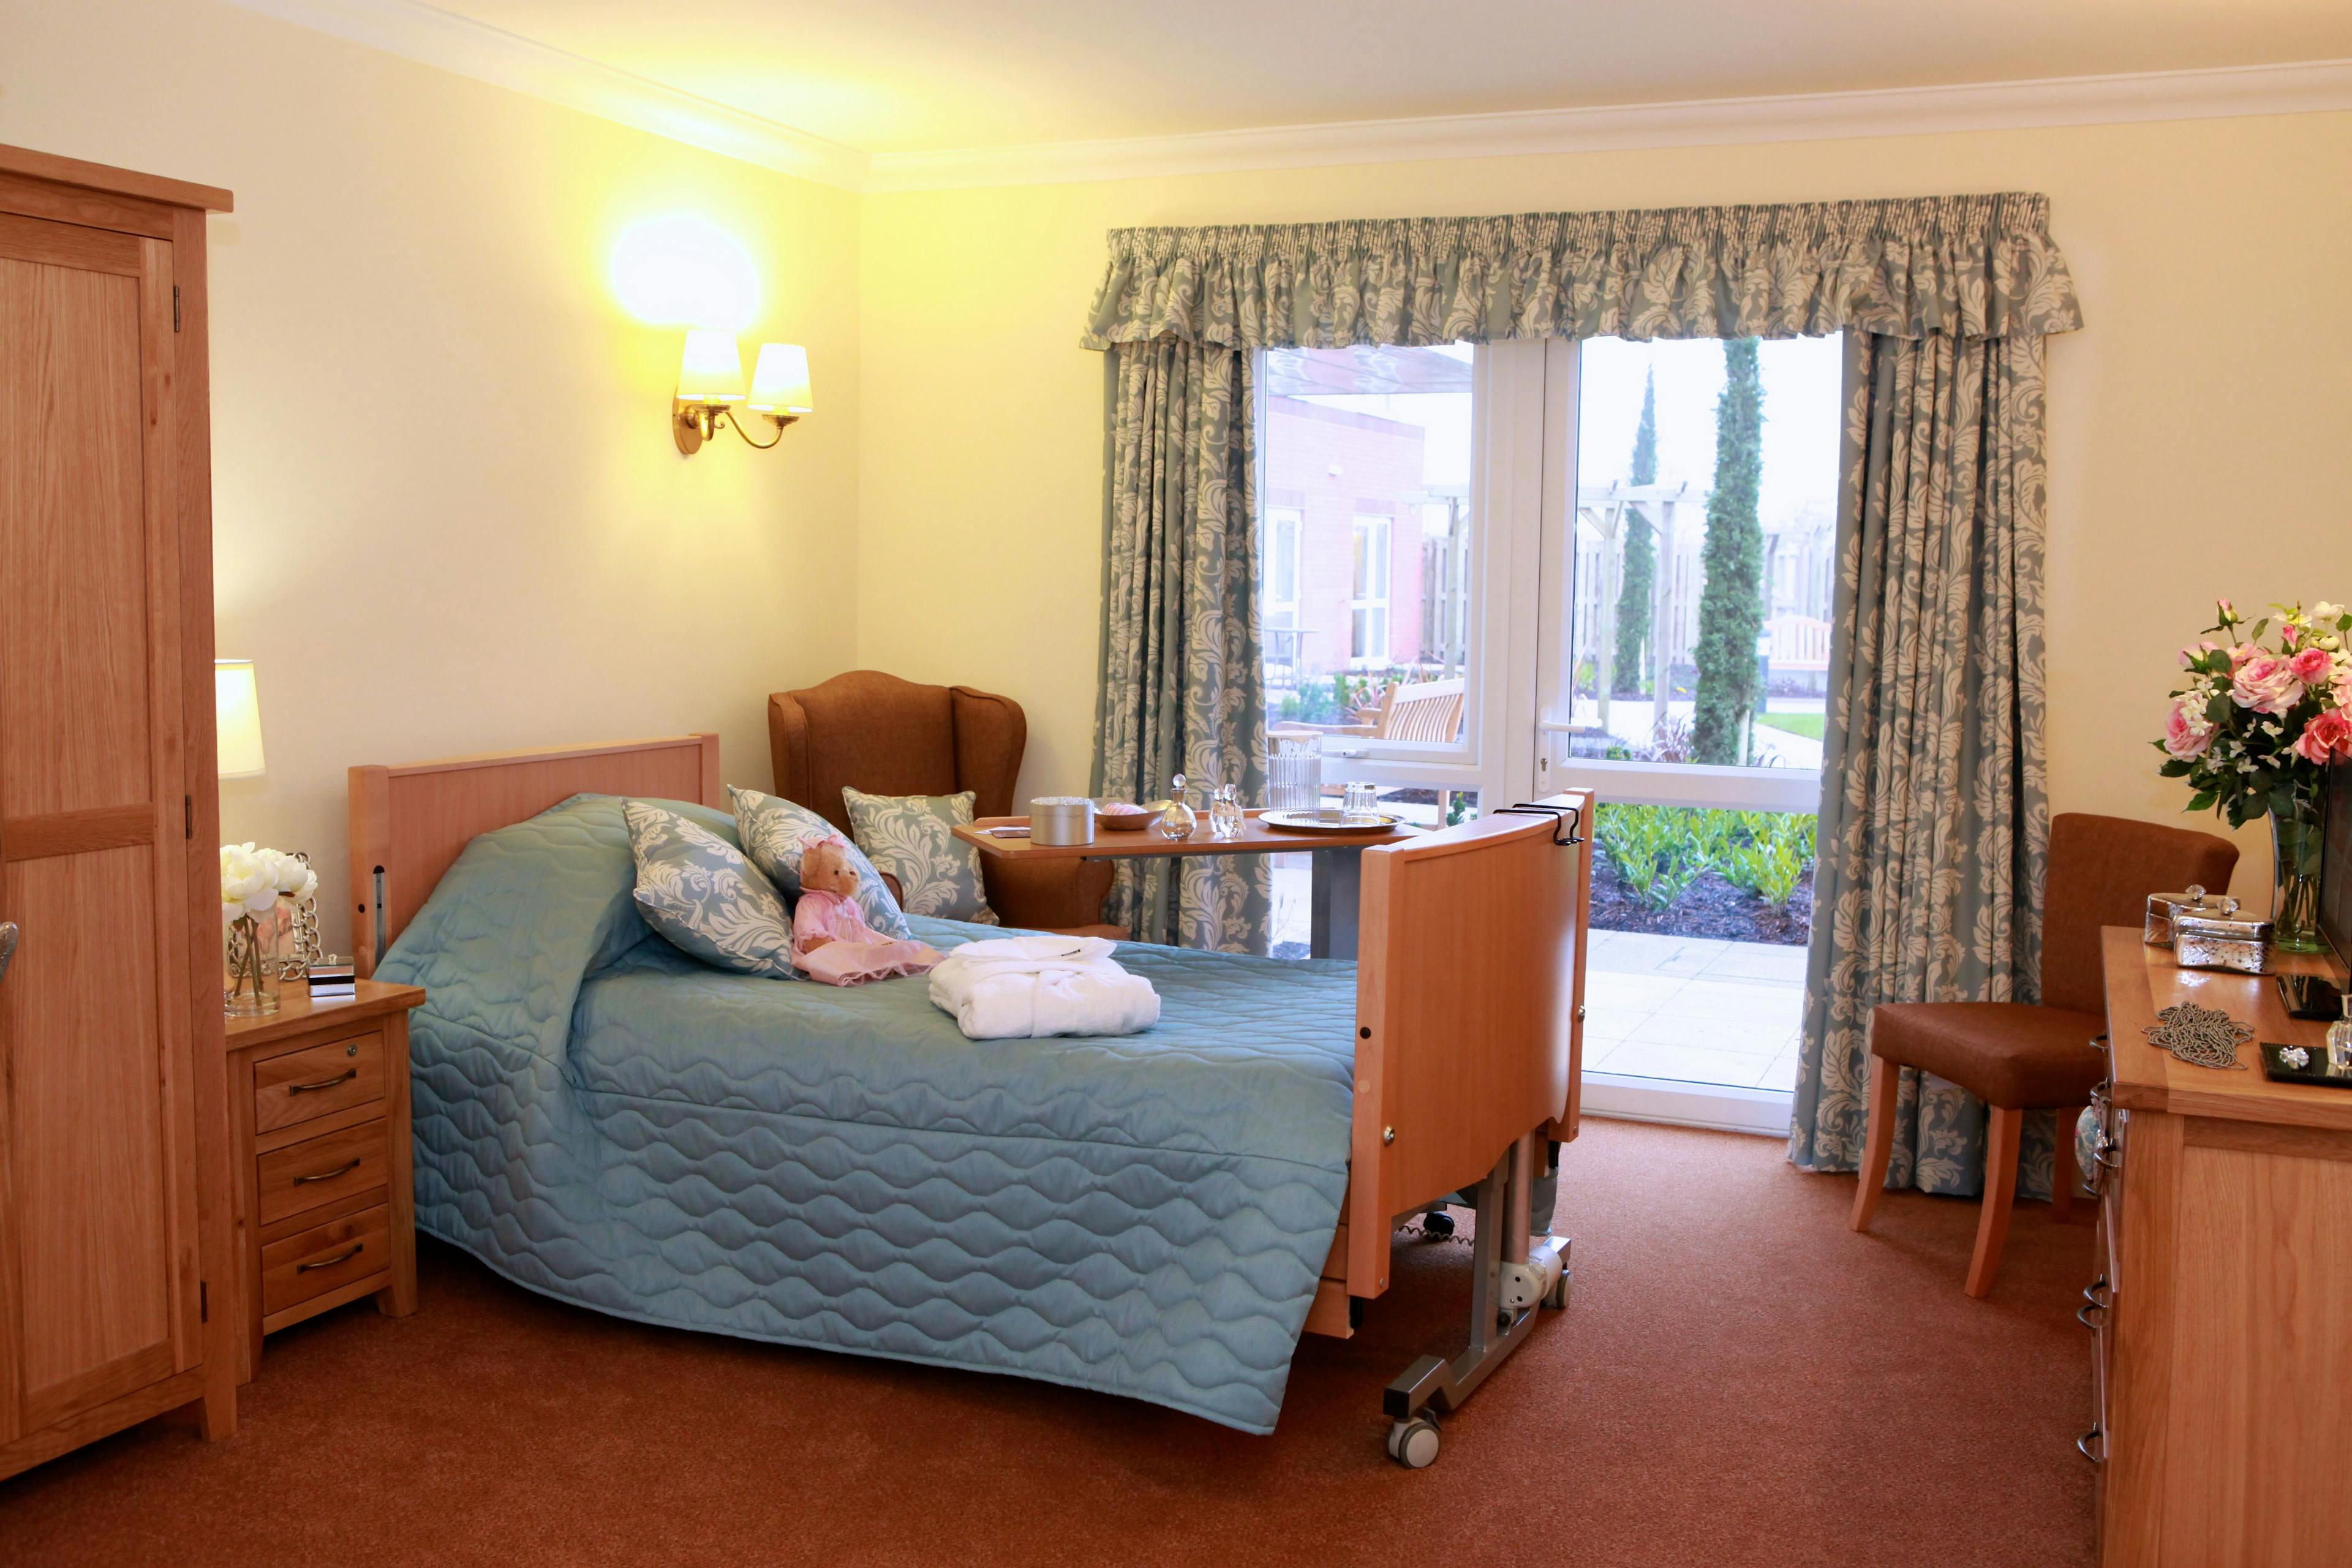 Bedroom of Latimer Court Care Home in Worcester, Worcestershire 